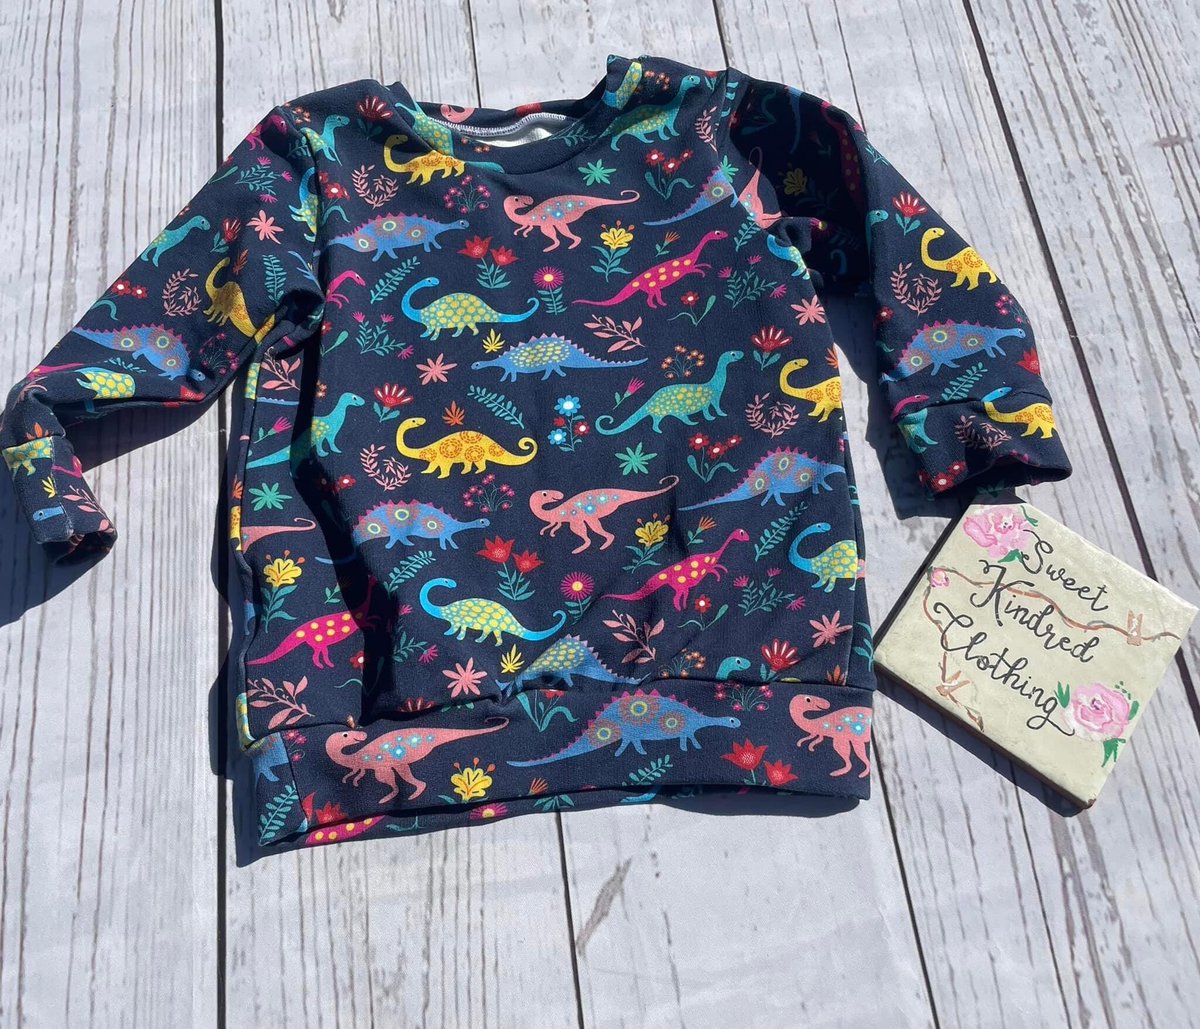 Excited to share this item from my #etsy shop: Colourful Dinosaur jumper, gender neutral Dinosaur jumper etsy.me/3ZaJwYa
#craftbizparty #ukmakers #htlmp